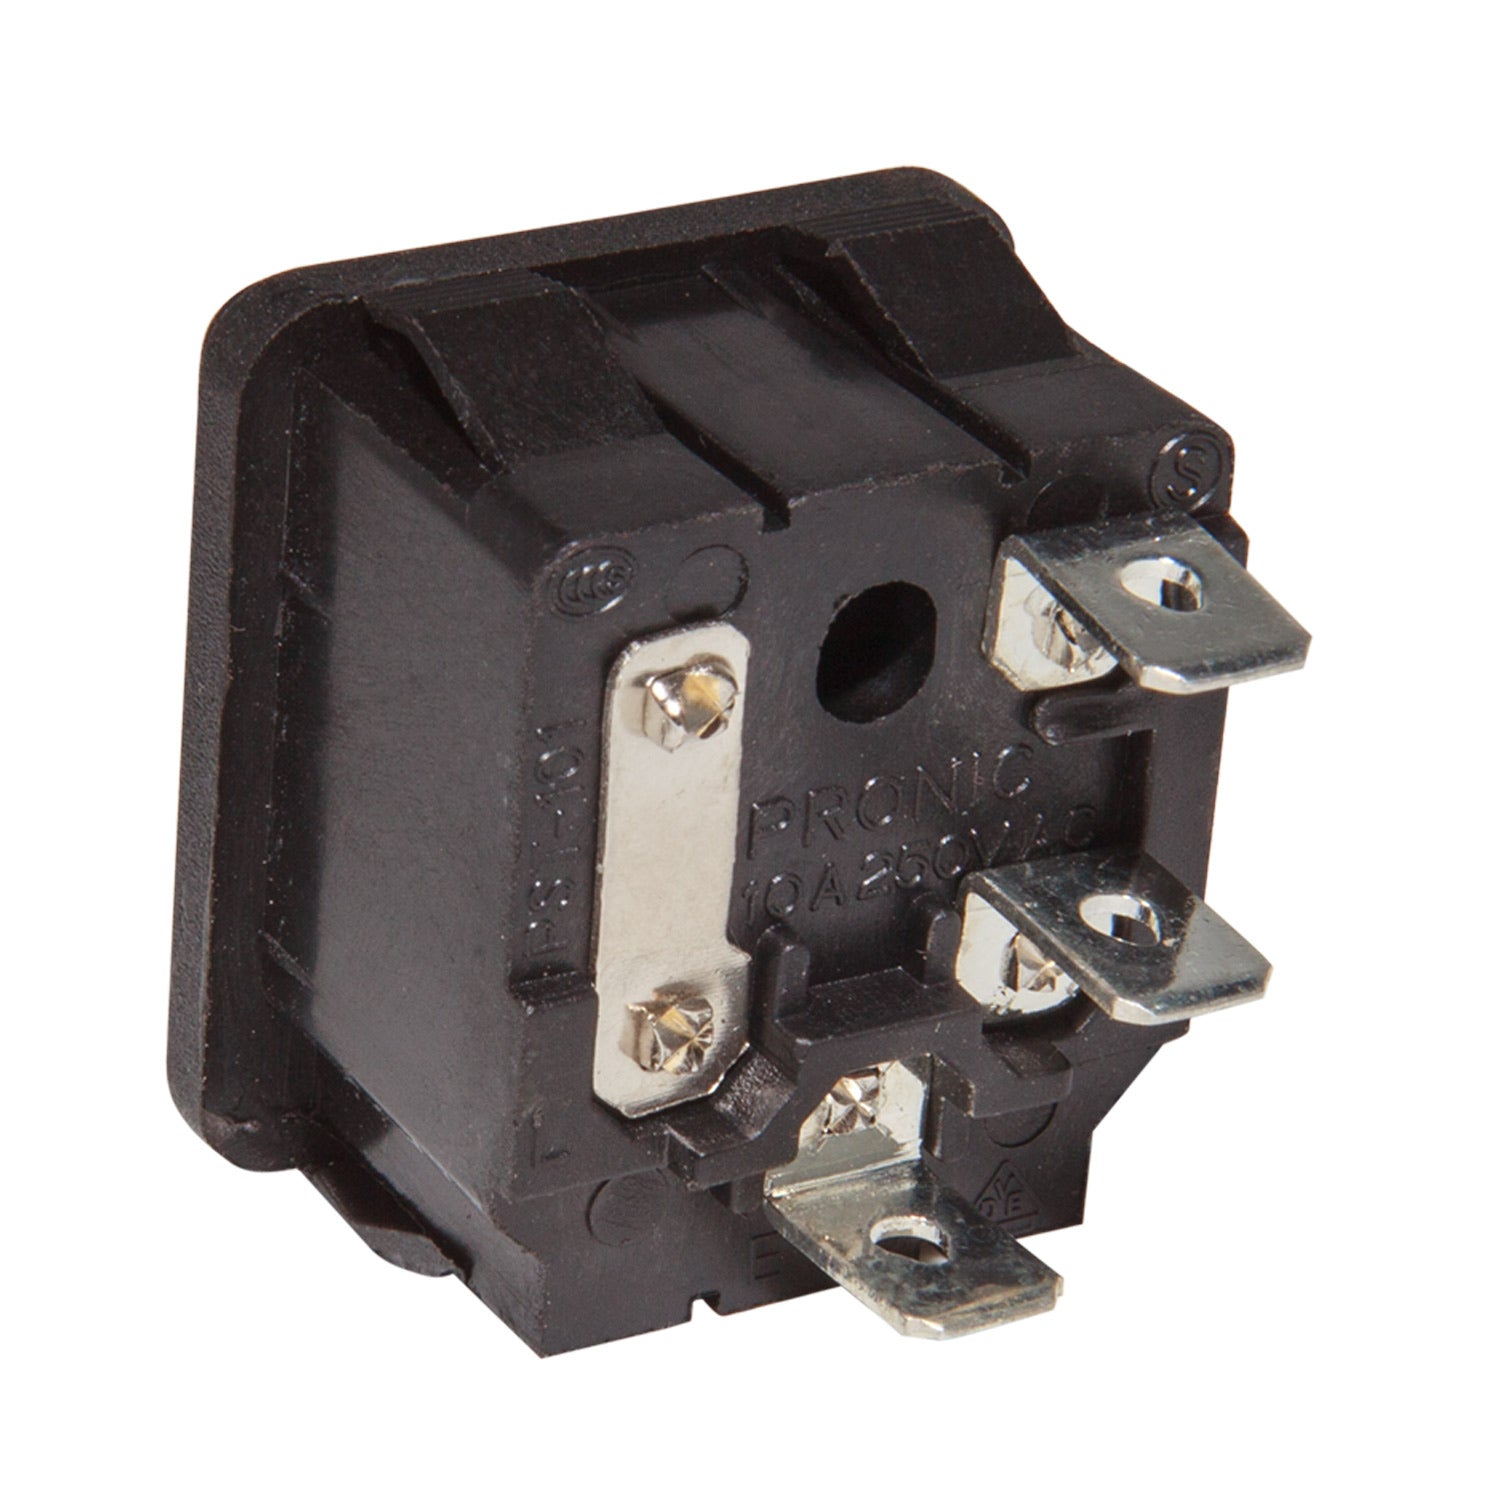 P_SF Power Socket Fuse | AC Power Plug | Black Inlet with Fuse Holder